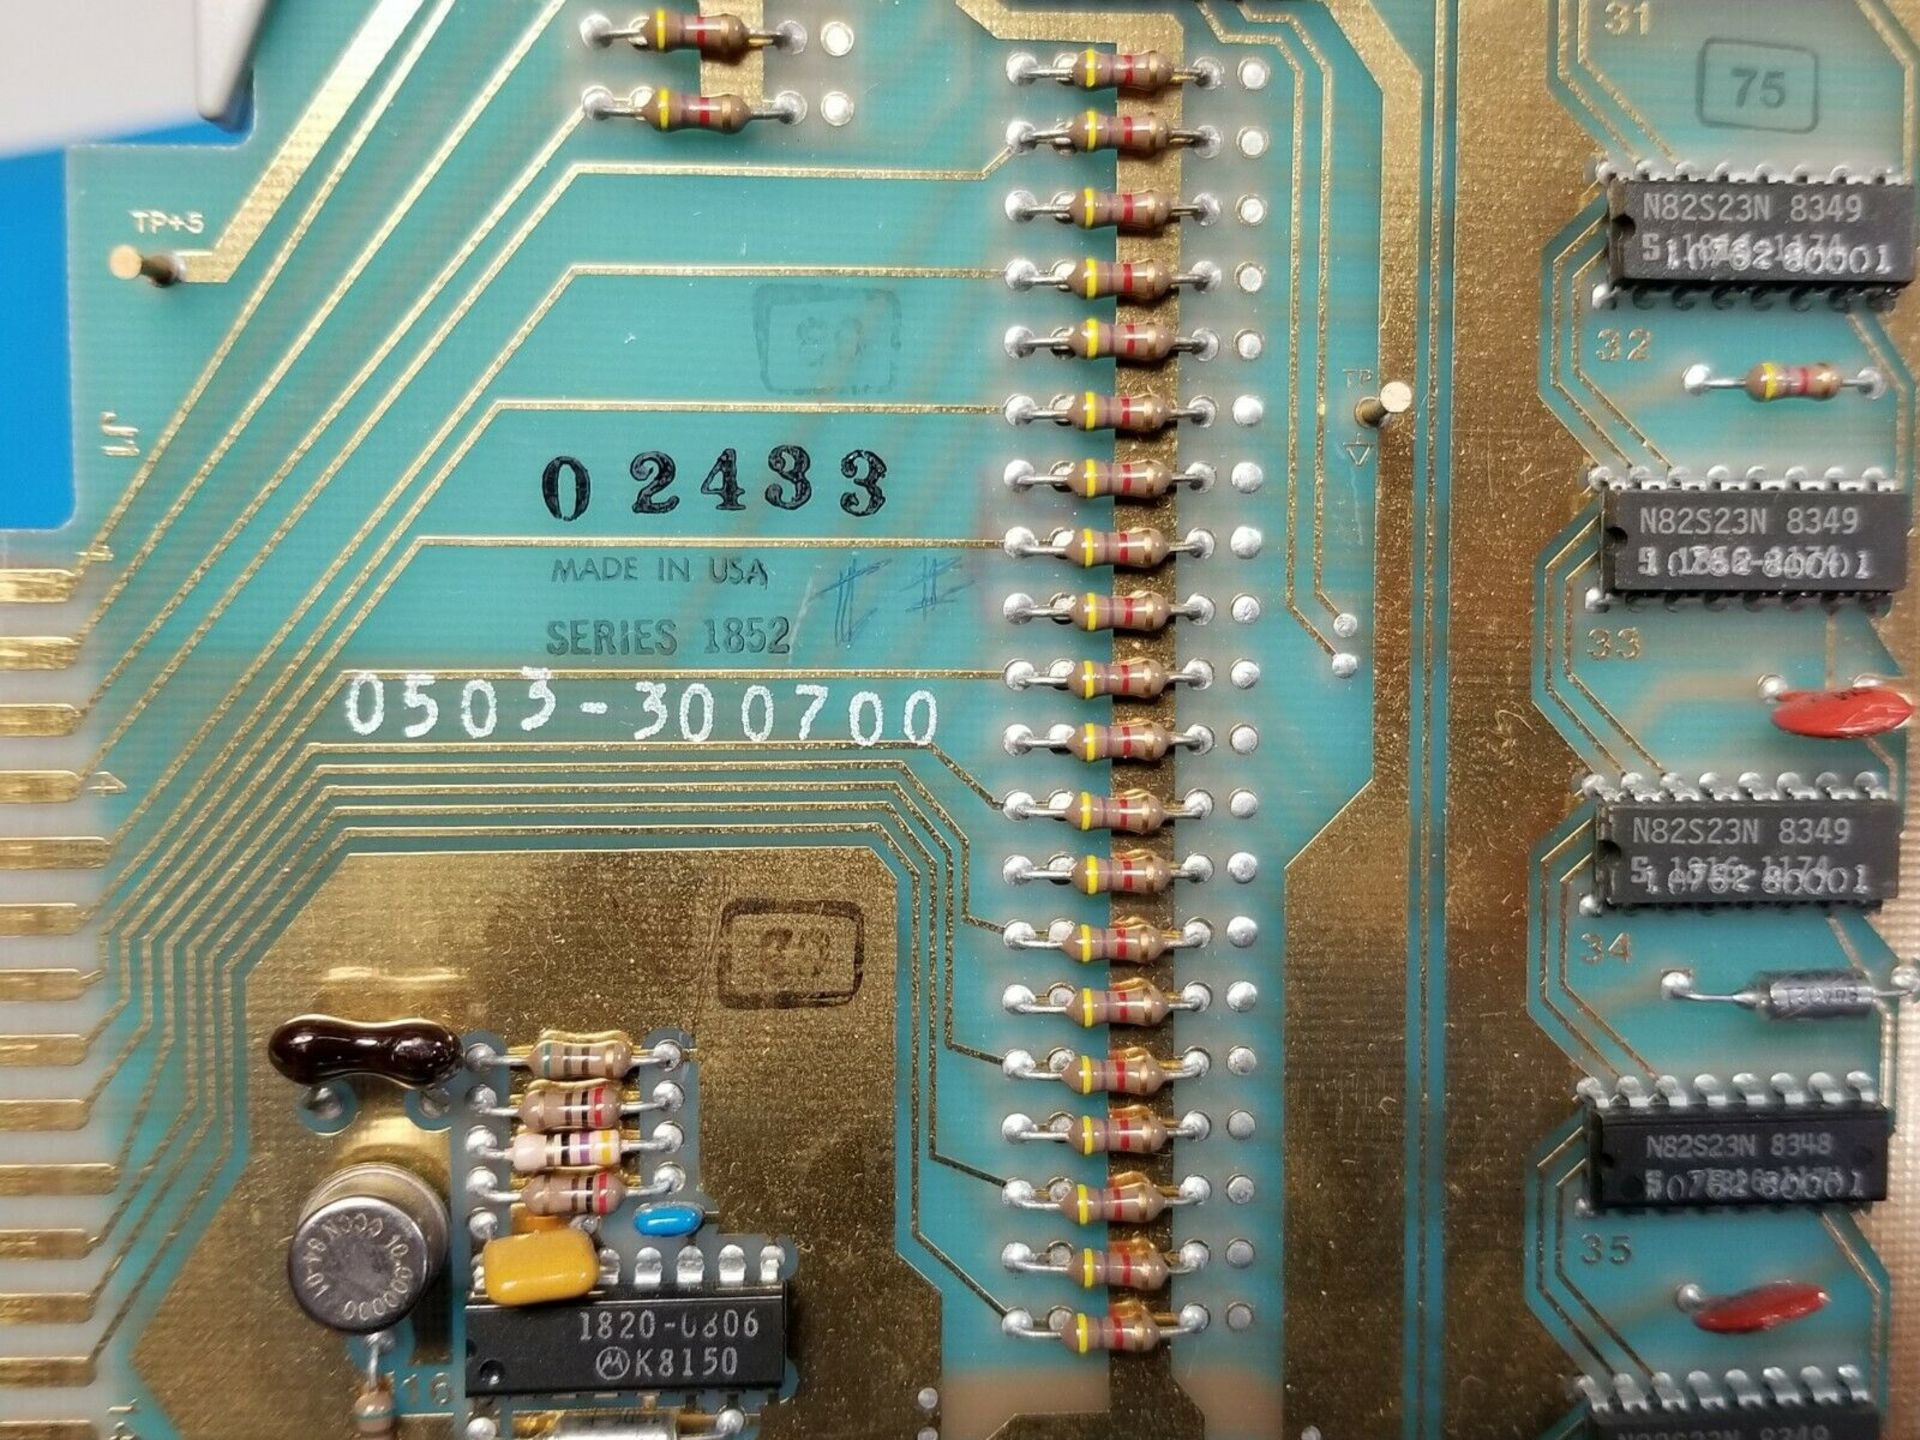 HP COMPARATOR BOARD FOR ULTRATECH STEPPER - Image 3 of 3